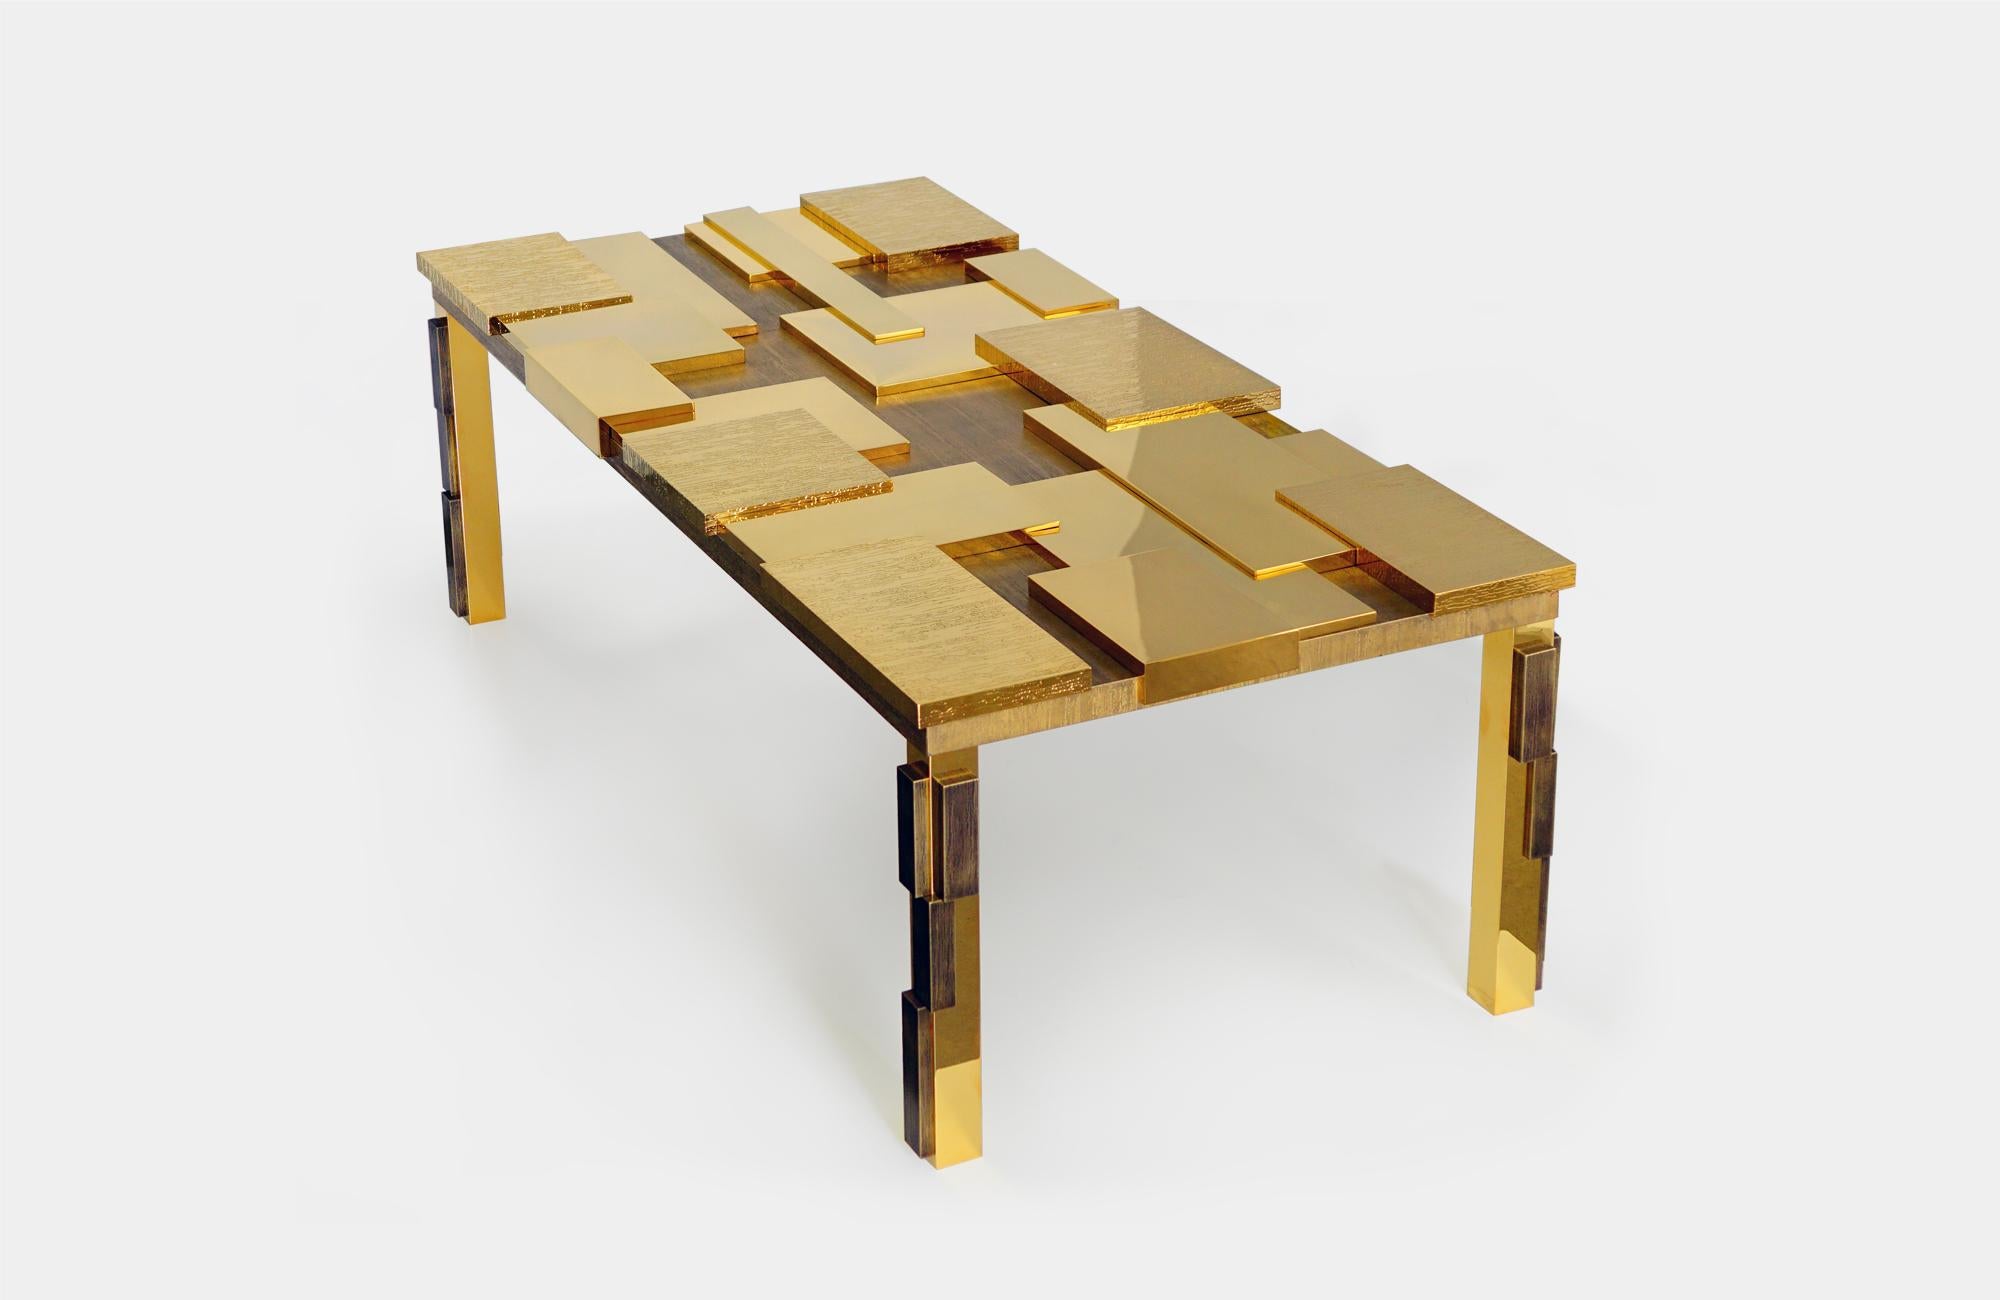 Cuspid rectangular table, 2017

H41 W123 D60 CM ?
H16.14 W48.43 D23.62 IN

24 karat yellow gold & bronze-plated metal.
Limited edition of 8 + 2AP.